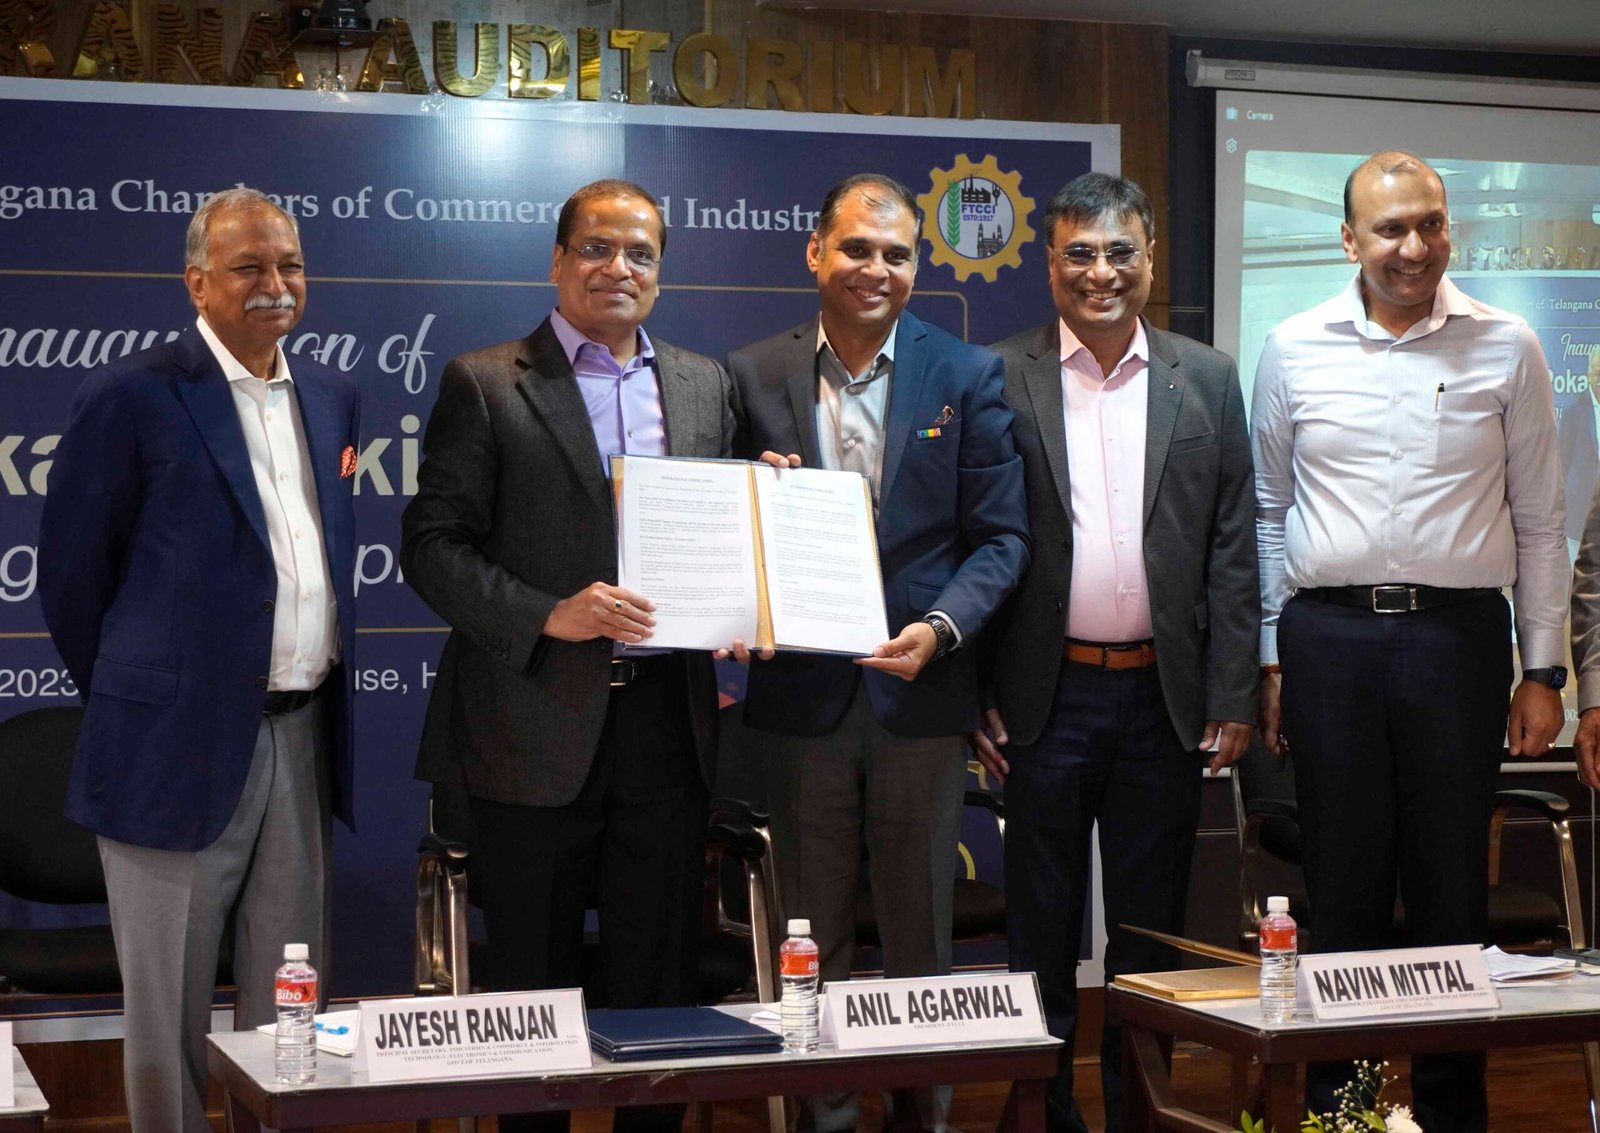 FTCCI seen exchaning MoU with JITO. Seen in the pic are Anil Agarwal, Navin Mital, Gautham Chand Jain